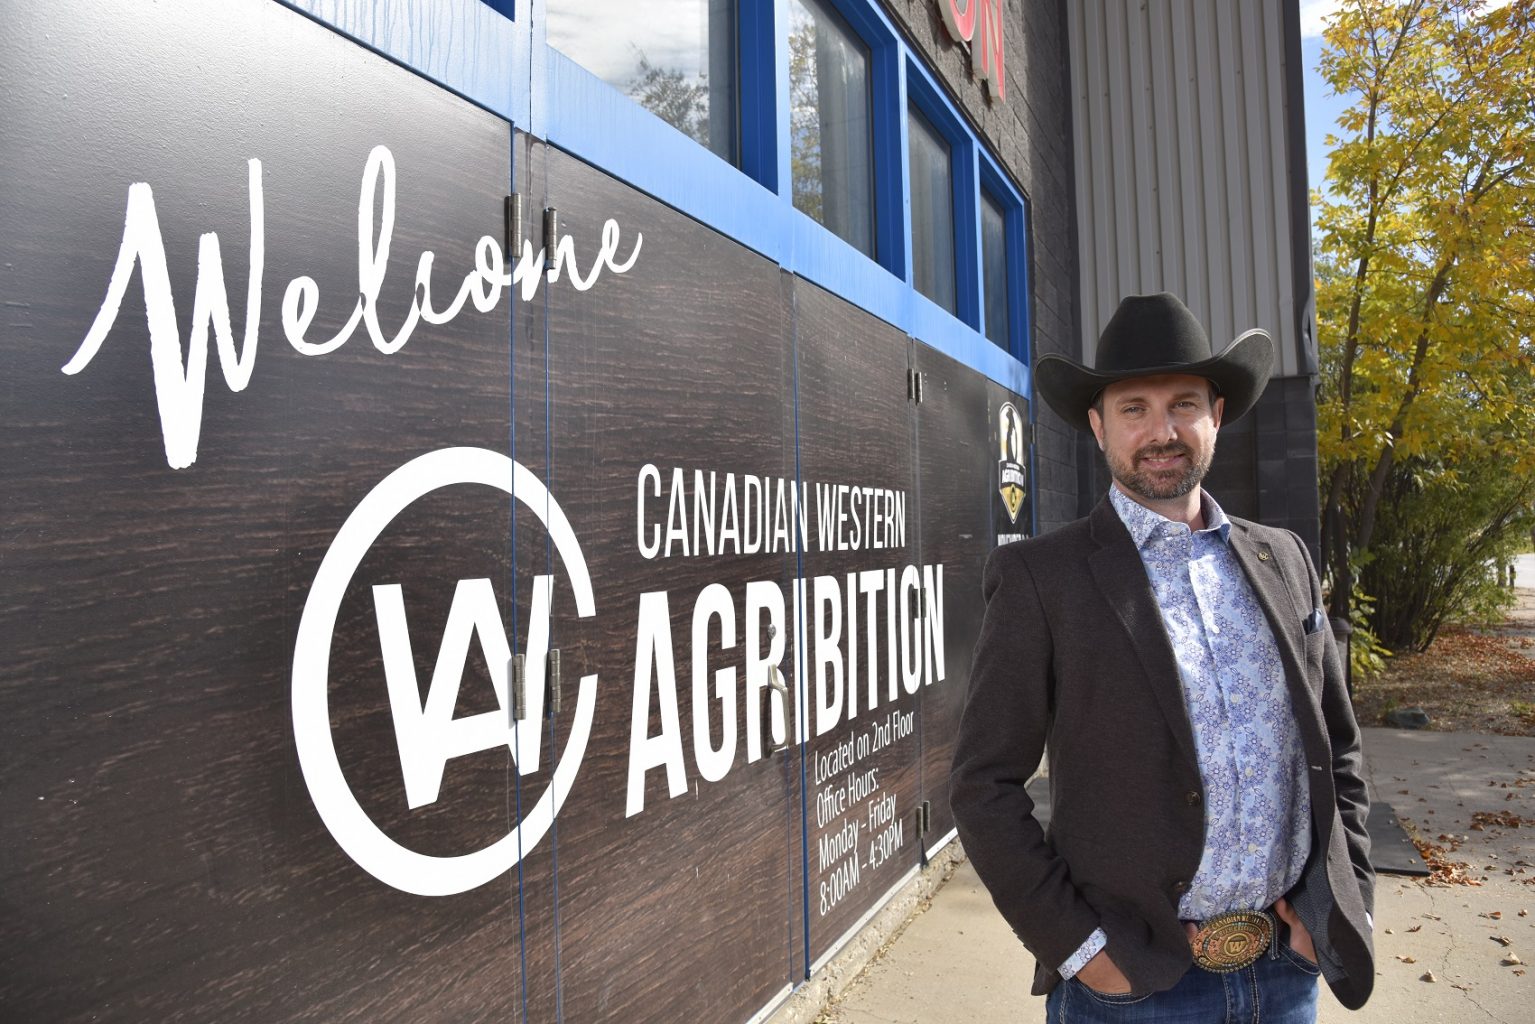 Despite all of the challenges, Chris Lane insists that as CEO of Agribition he has the best job in Saskatchewan, in part because he believes the province is coming into another golden age of agriculture.